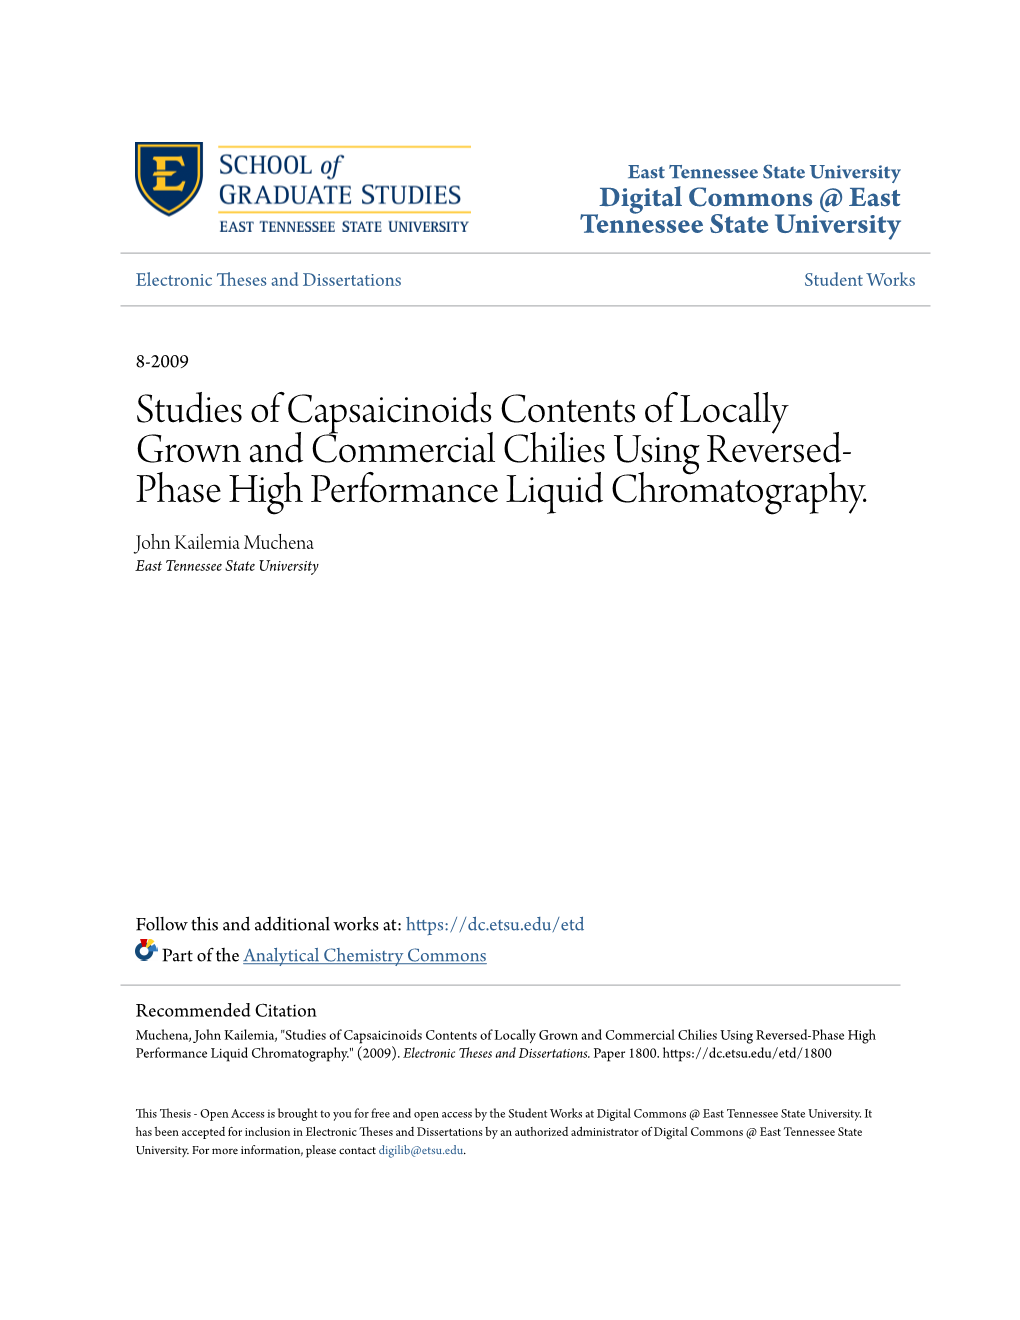 Studies of Capsaicinoids Contents of Locally Grown and Commercial Chilies Using Reversed- Phase High Performance Liquid Chromatography